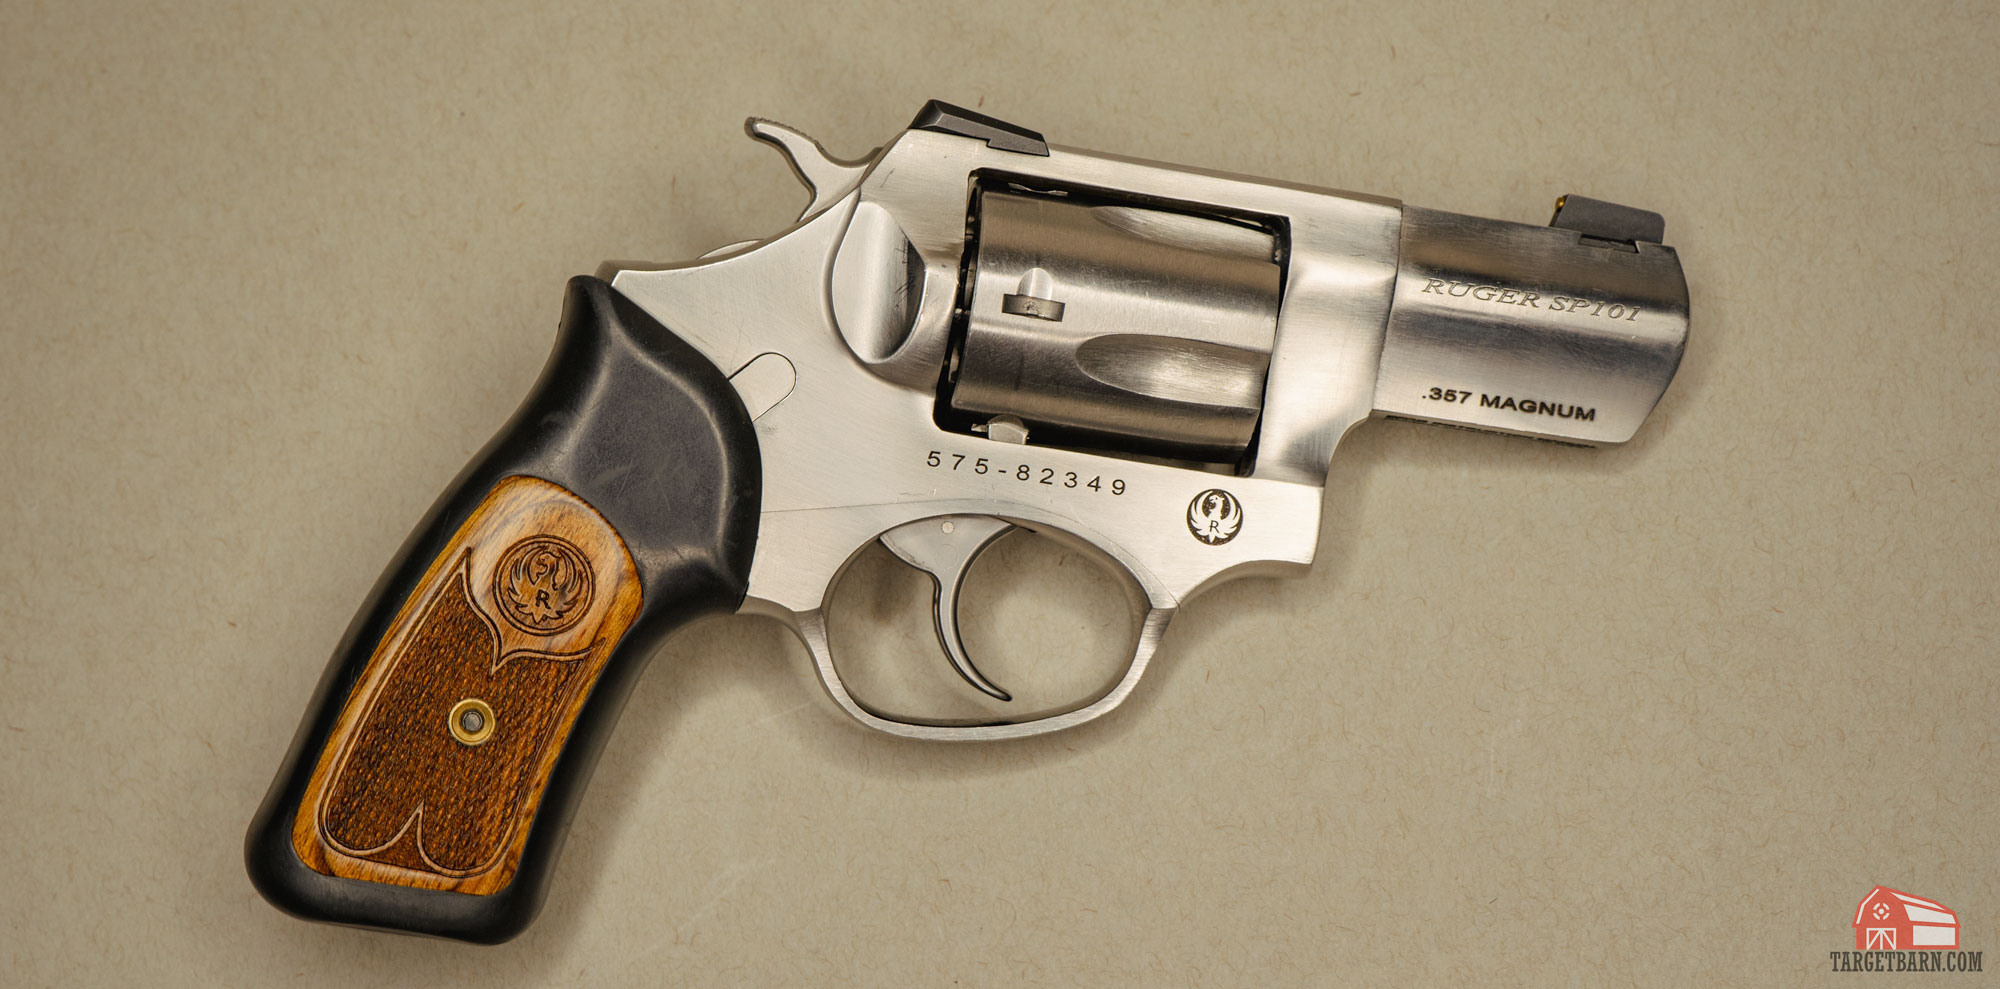 a ruger sp101 chambered in .357 magnumn